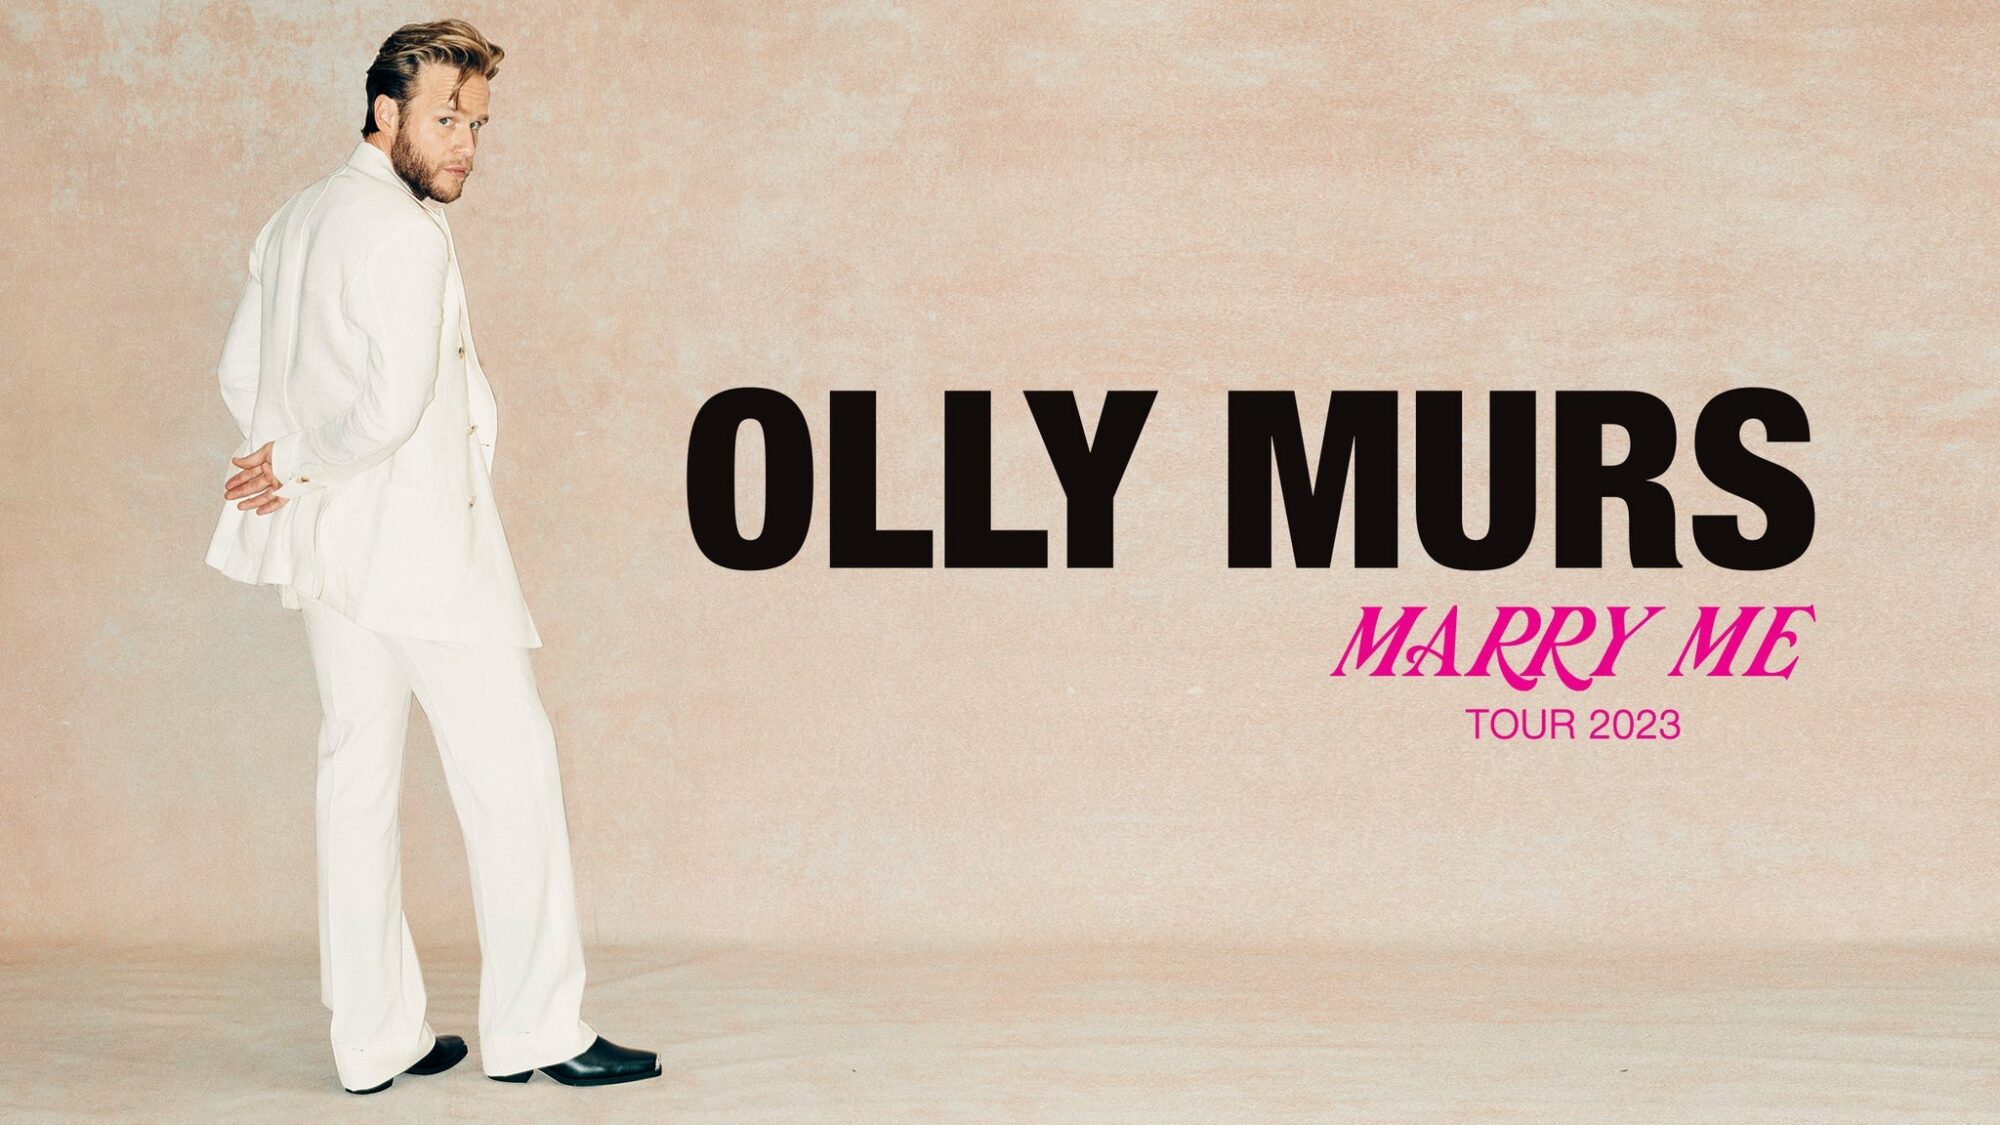 Olly Murs – Official Ticket and Hotel Packages at Scarborough Open Air Theatre, Scarborough